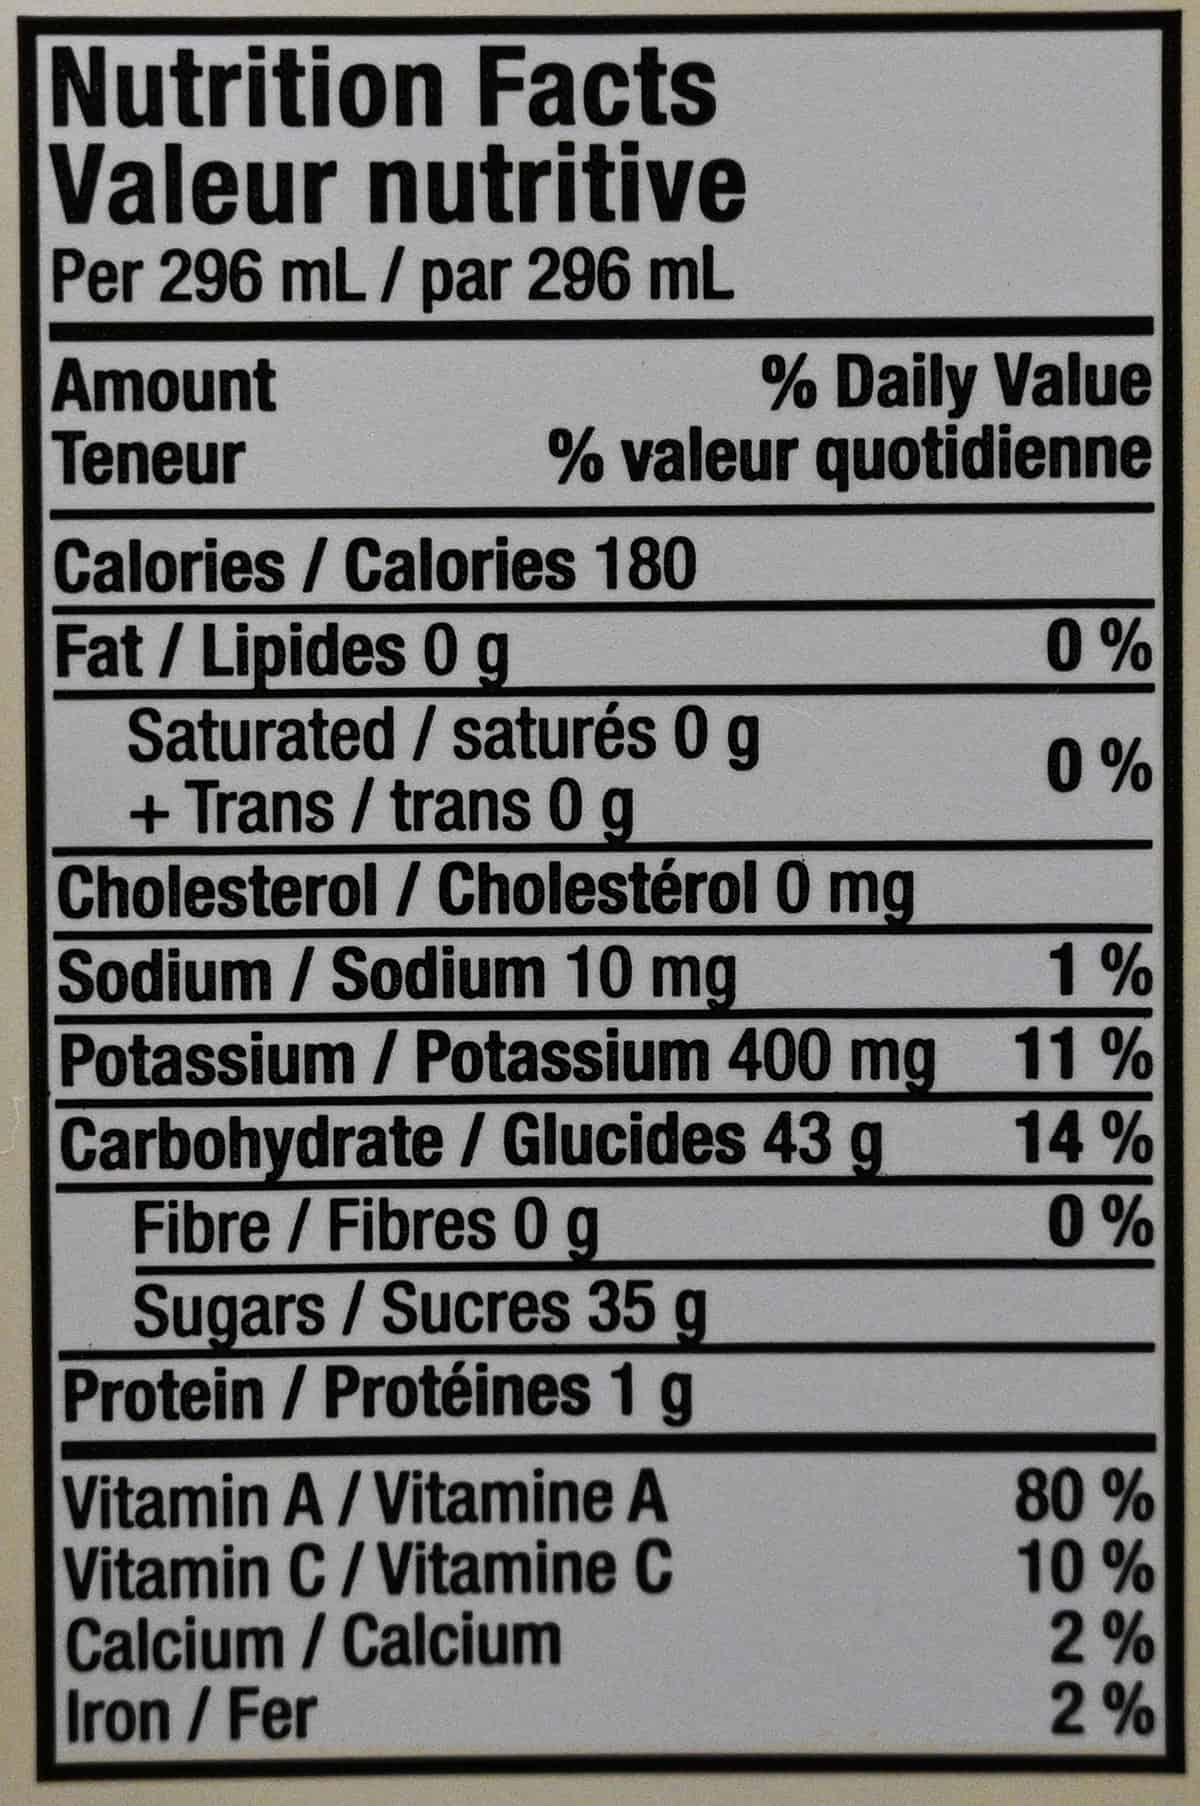 Image of the mighty mango nutrition facts label from the back of the container.